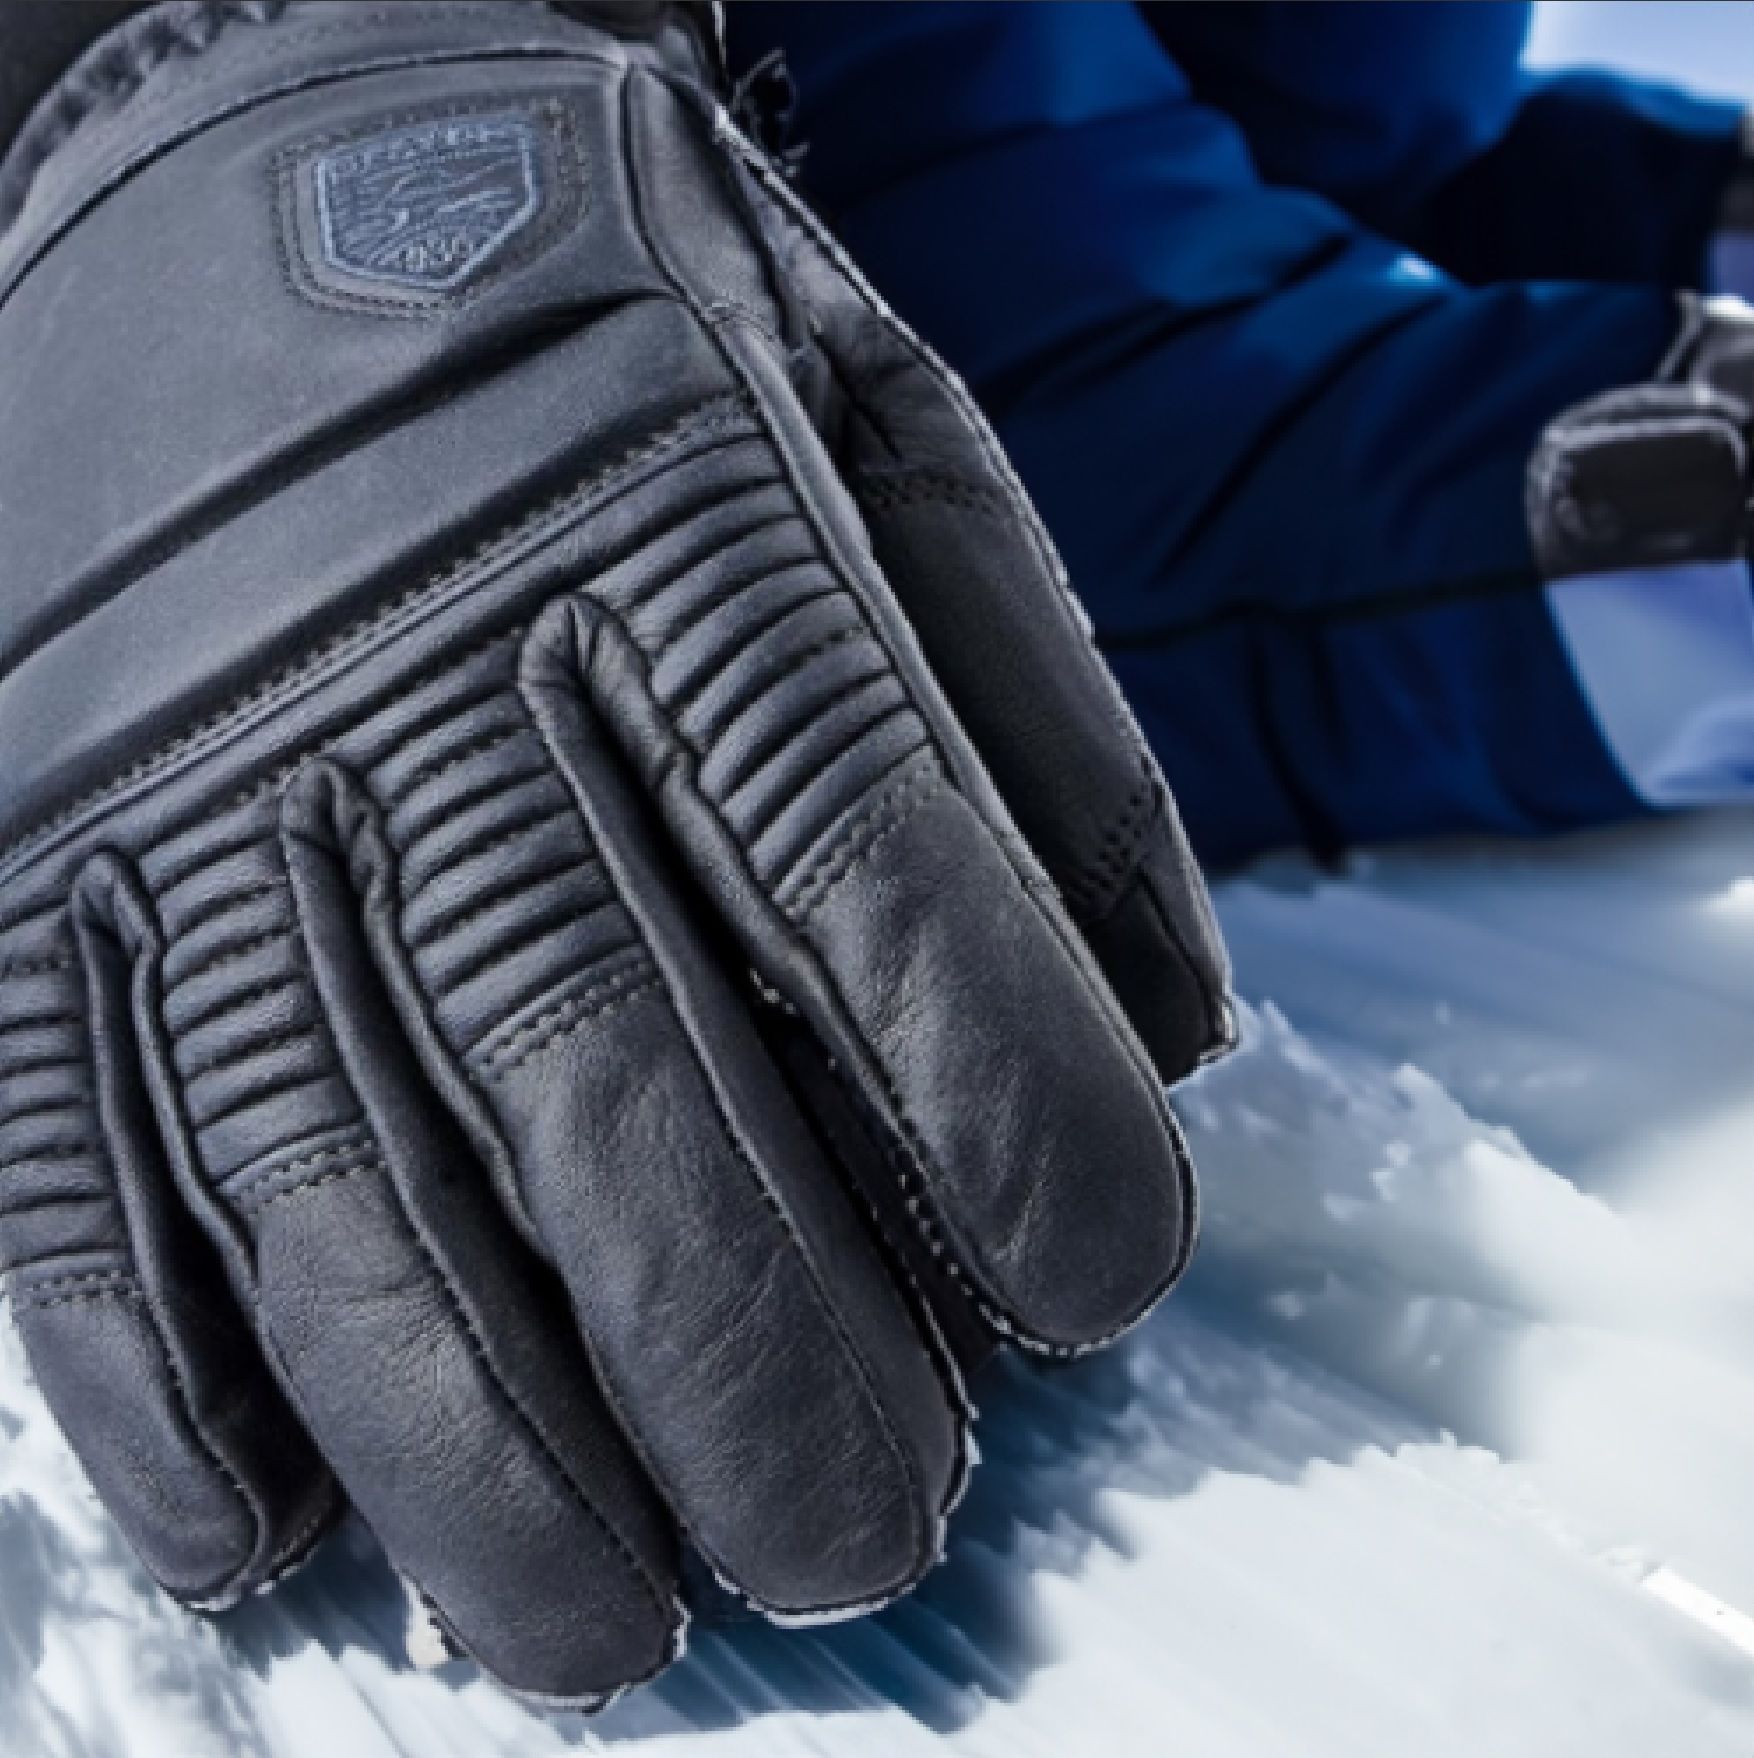 A pair of ski gloves with leather palms and waterproof membrane